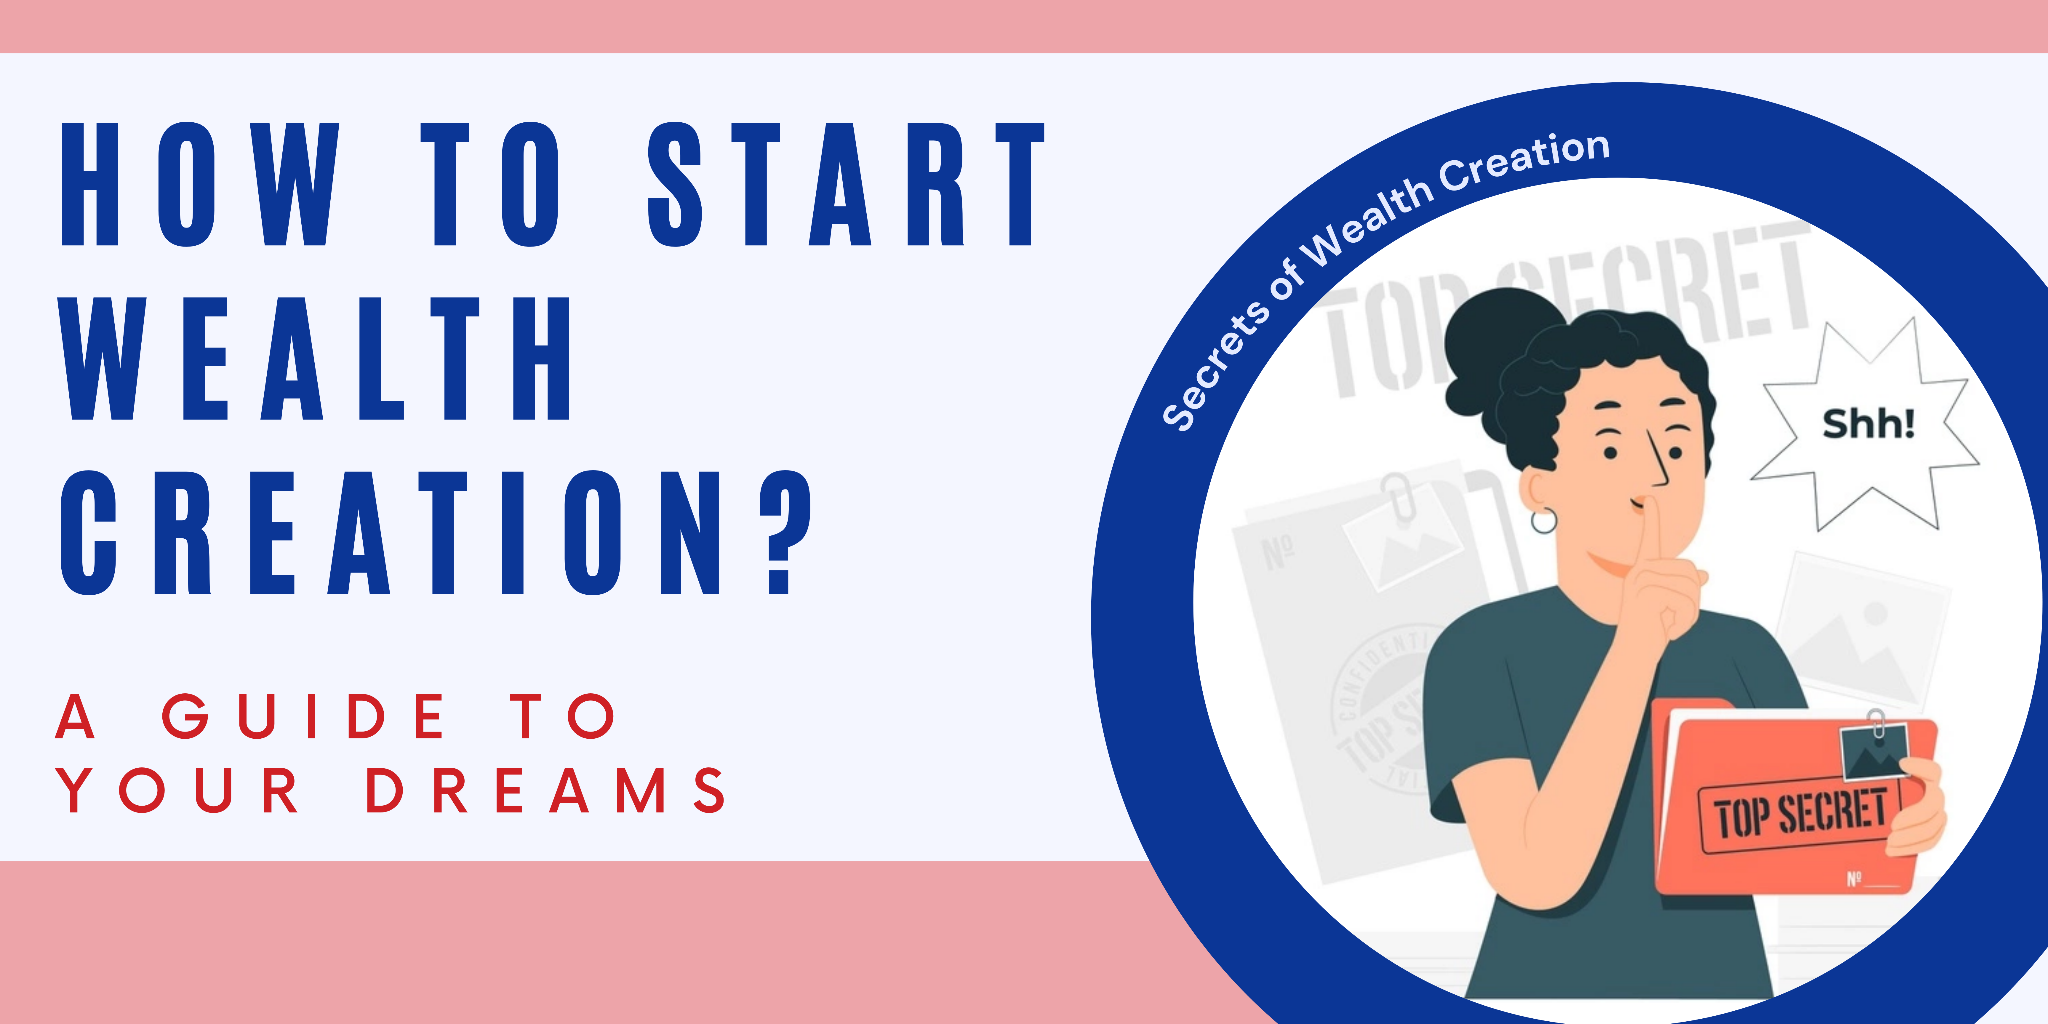 What are the Secrets of Wealth Creation?